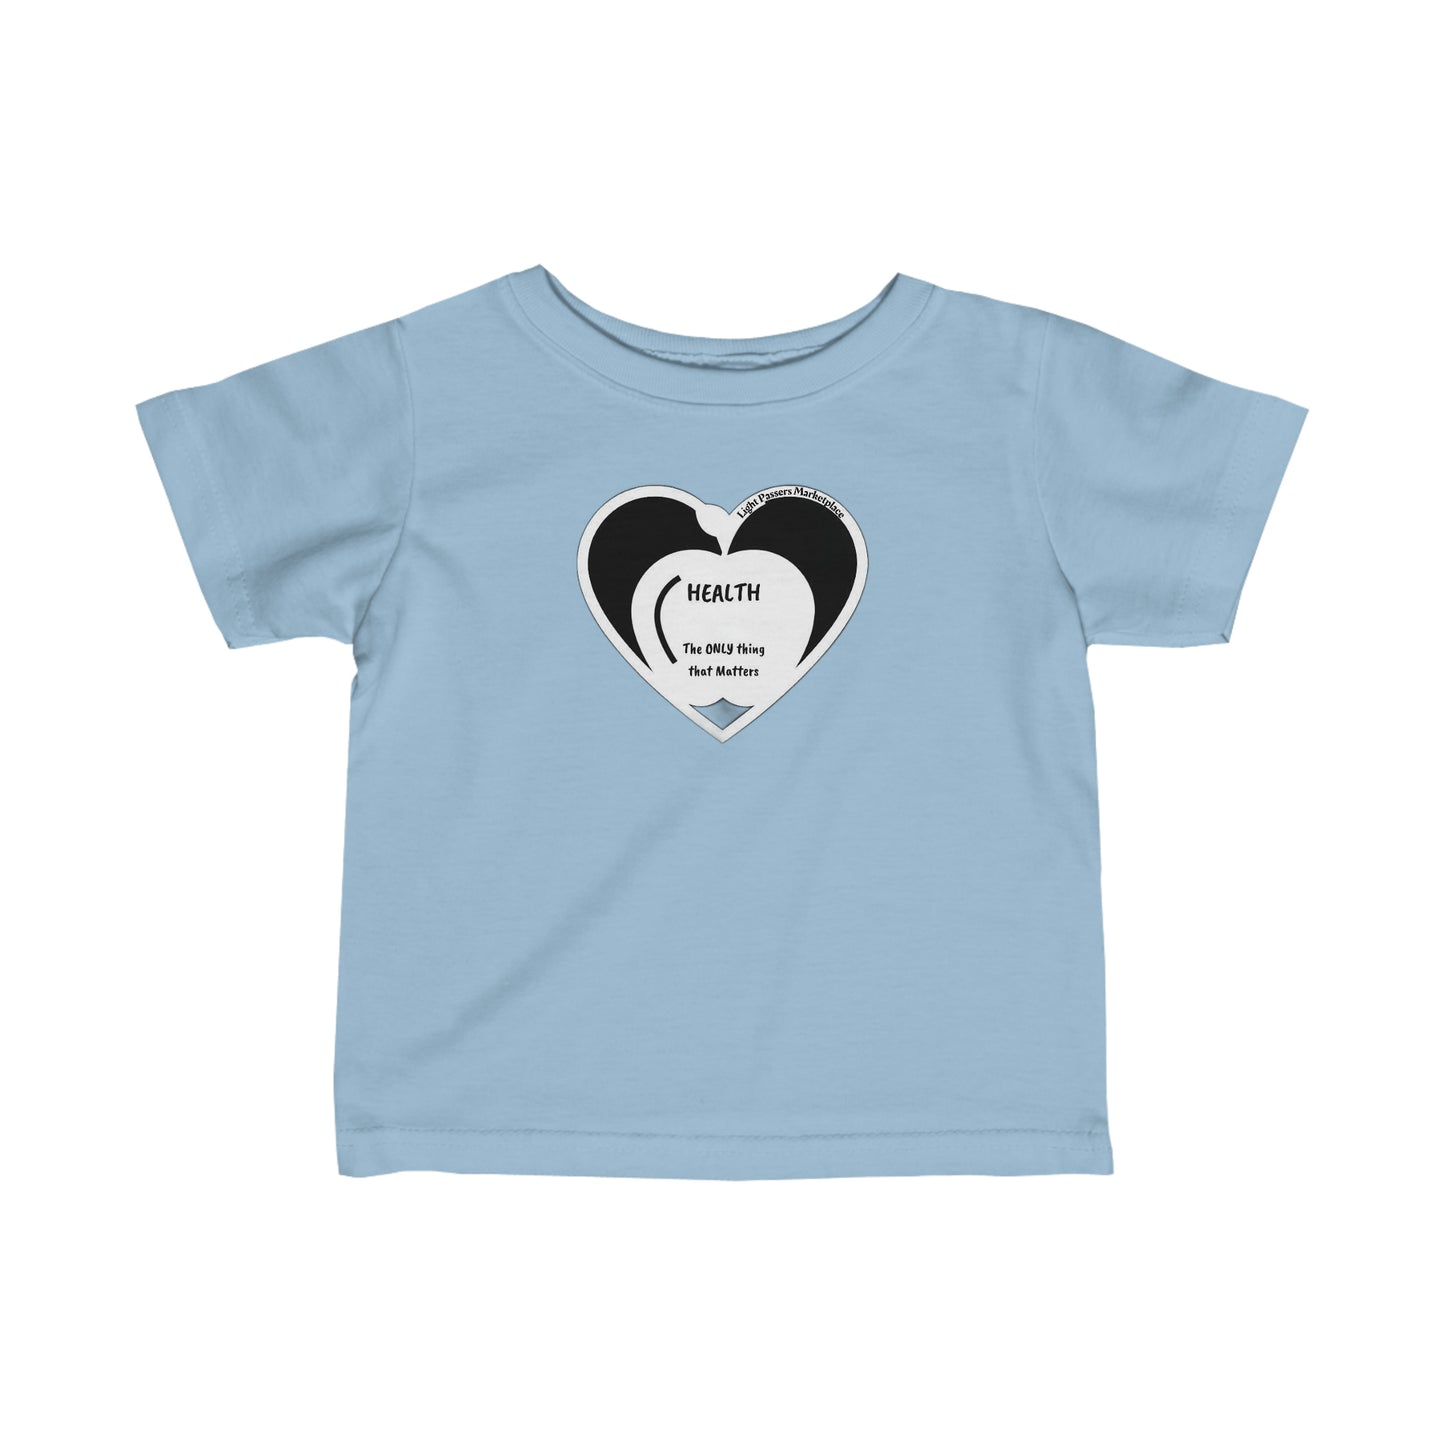 Infant fine jersey tee with heart design, ribbed knitting, and taped shoulders for comfort and durability. 100% Combed ringspun cotton, light fabric, classic fit. Apple Health Infant T-shirts Baby.